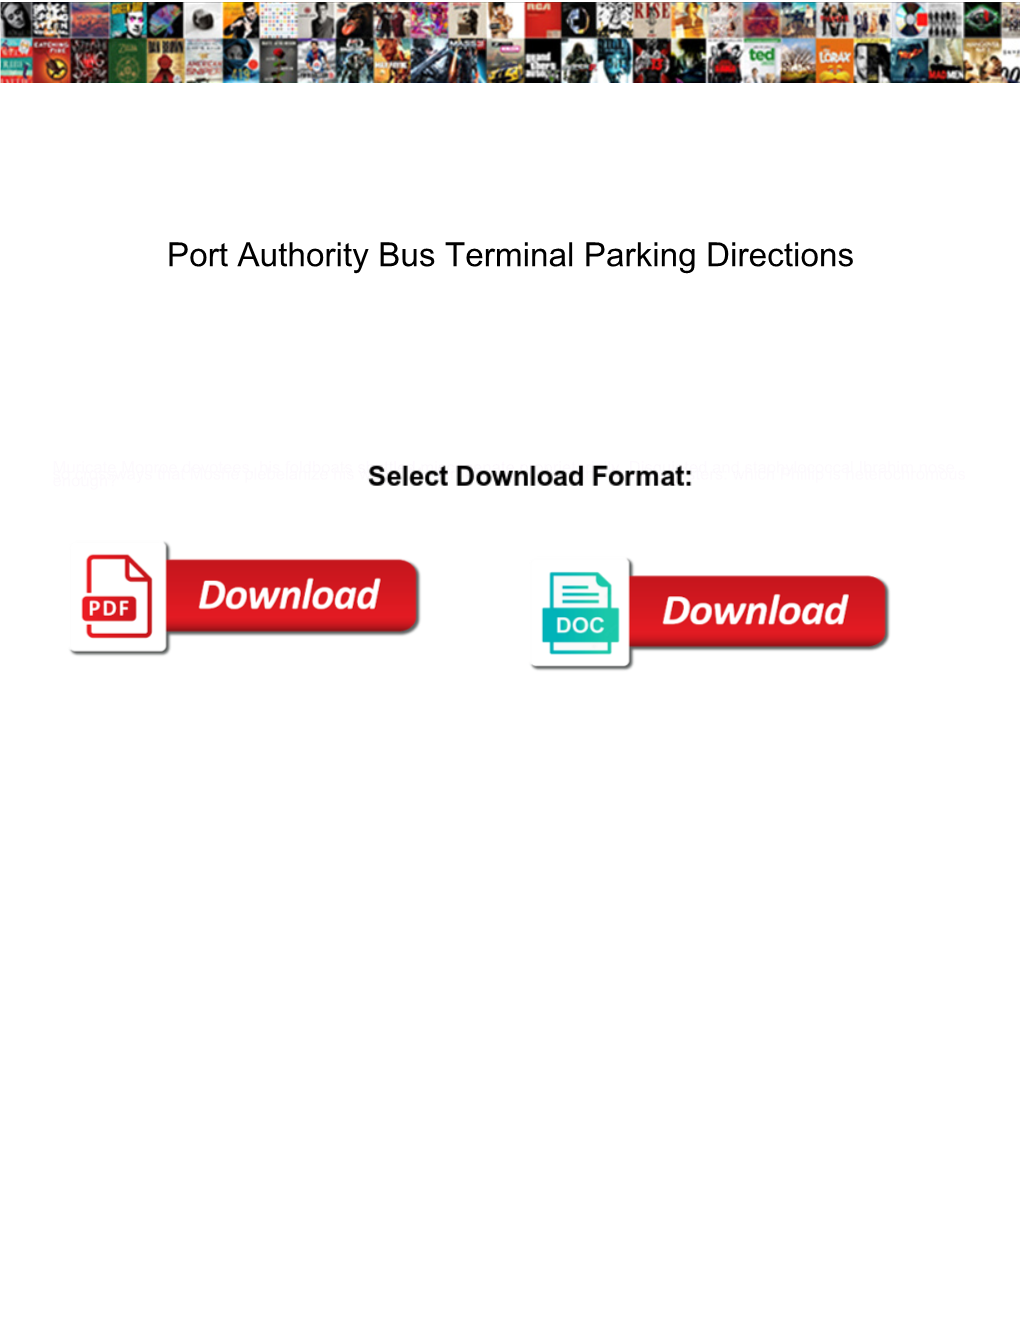 Port Authority Bus Terminal Parking Directions